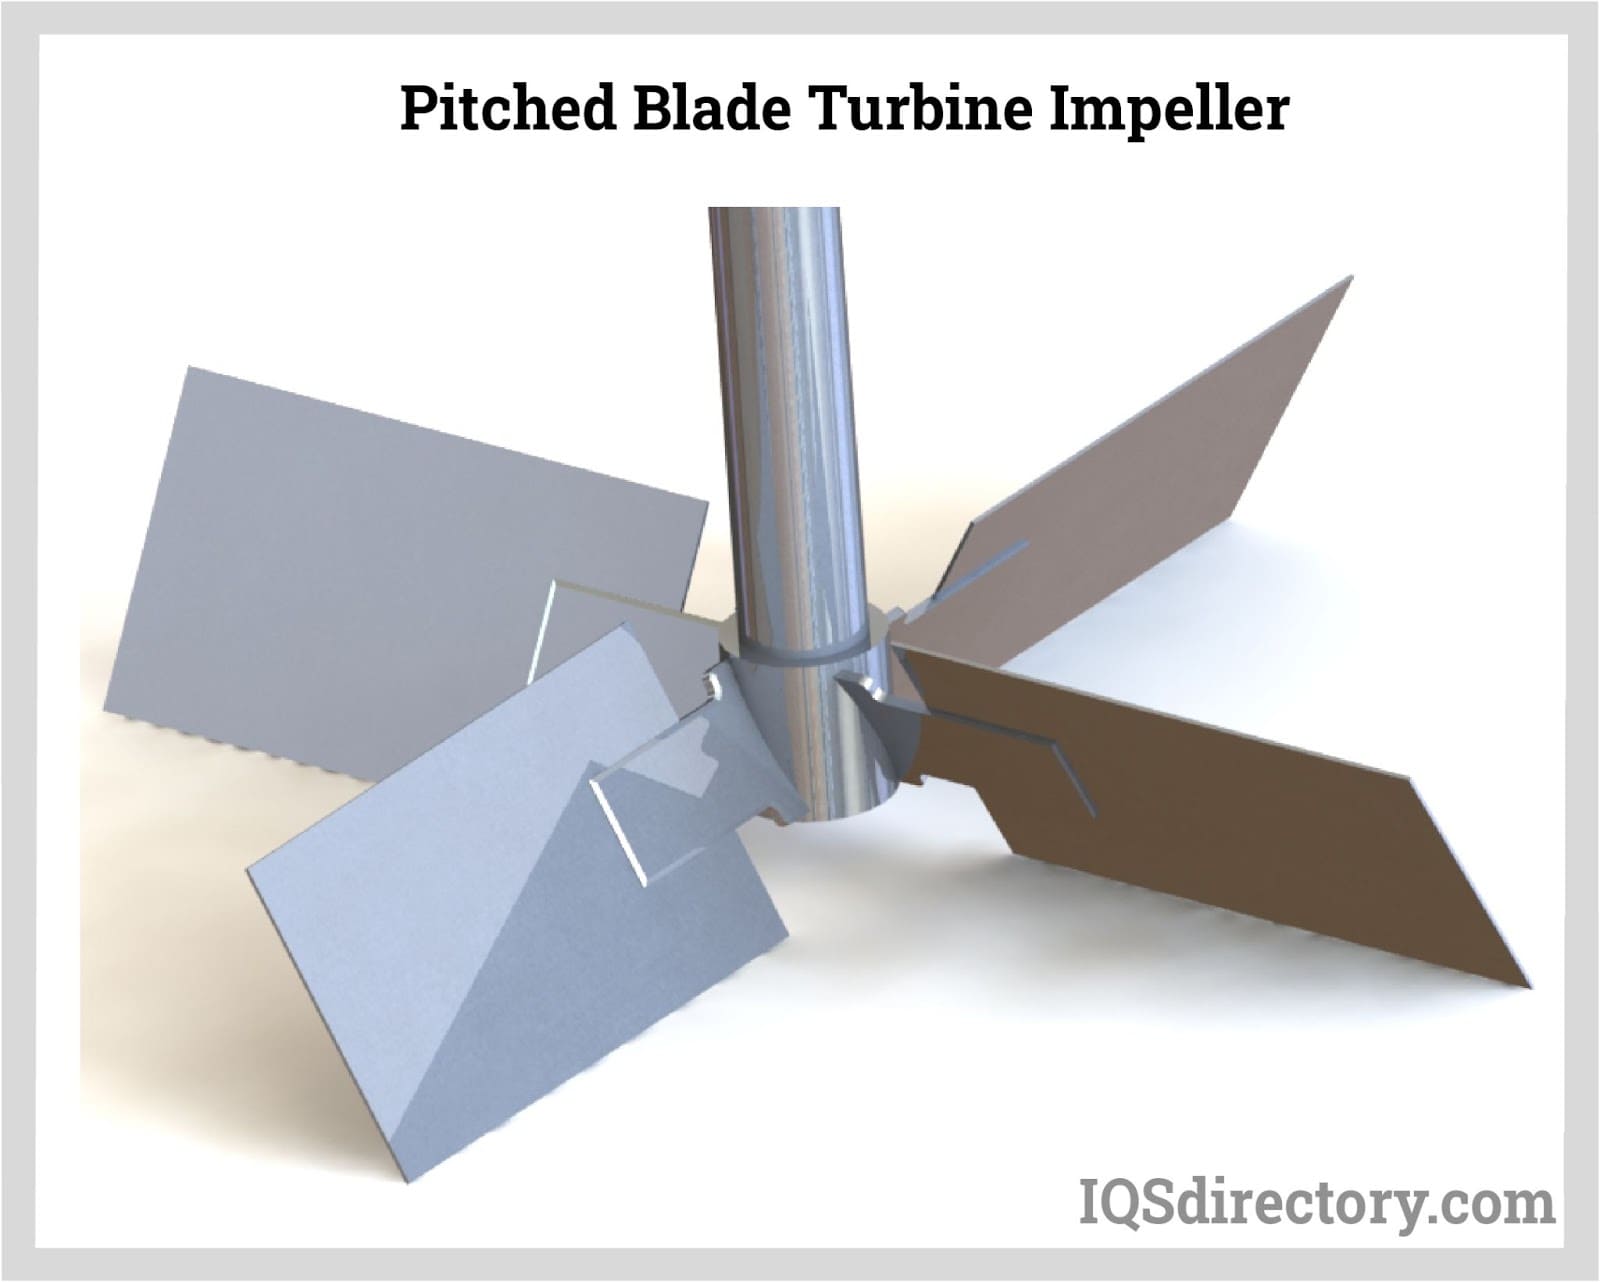 Pitched Blade Turbine Impeller